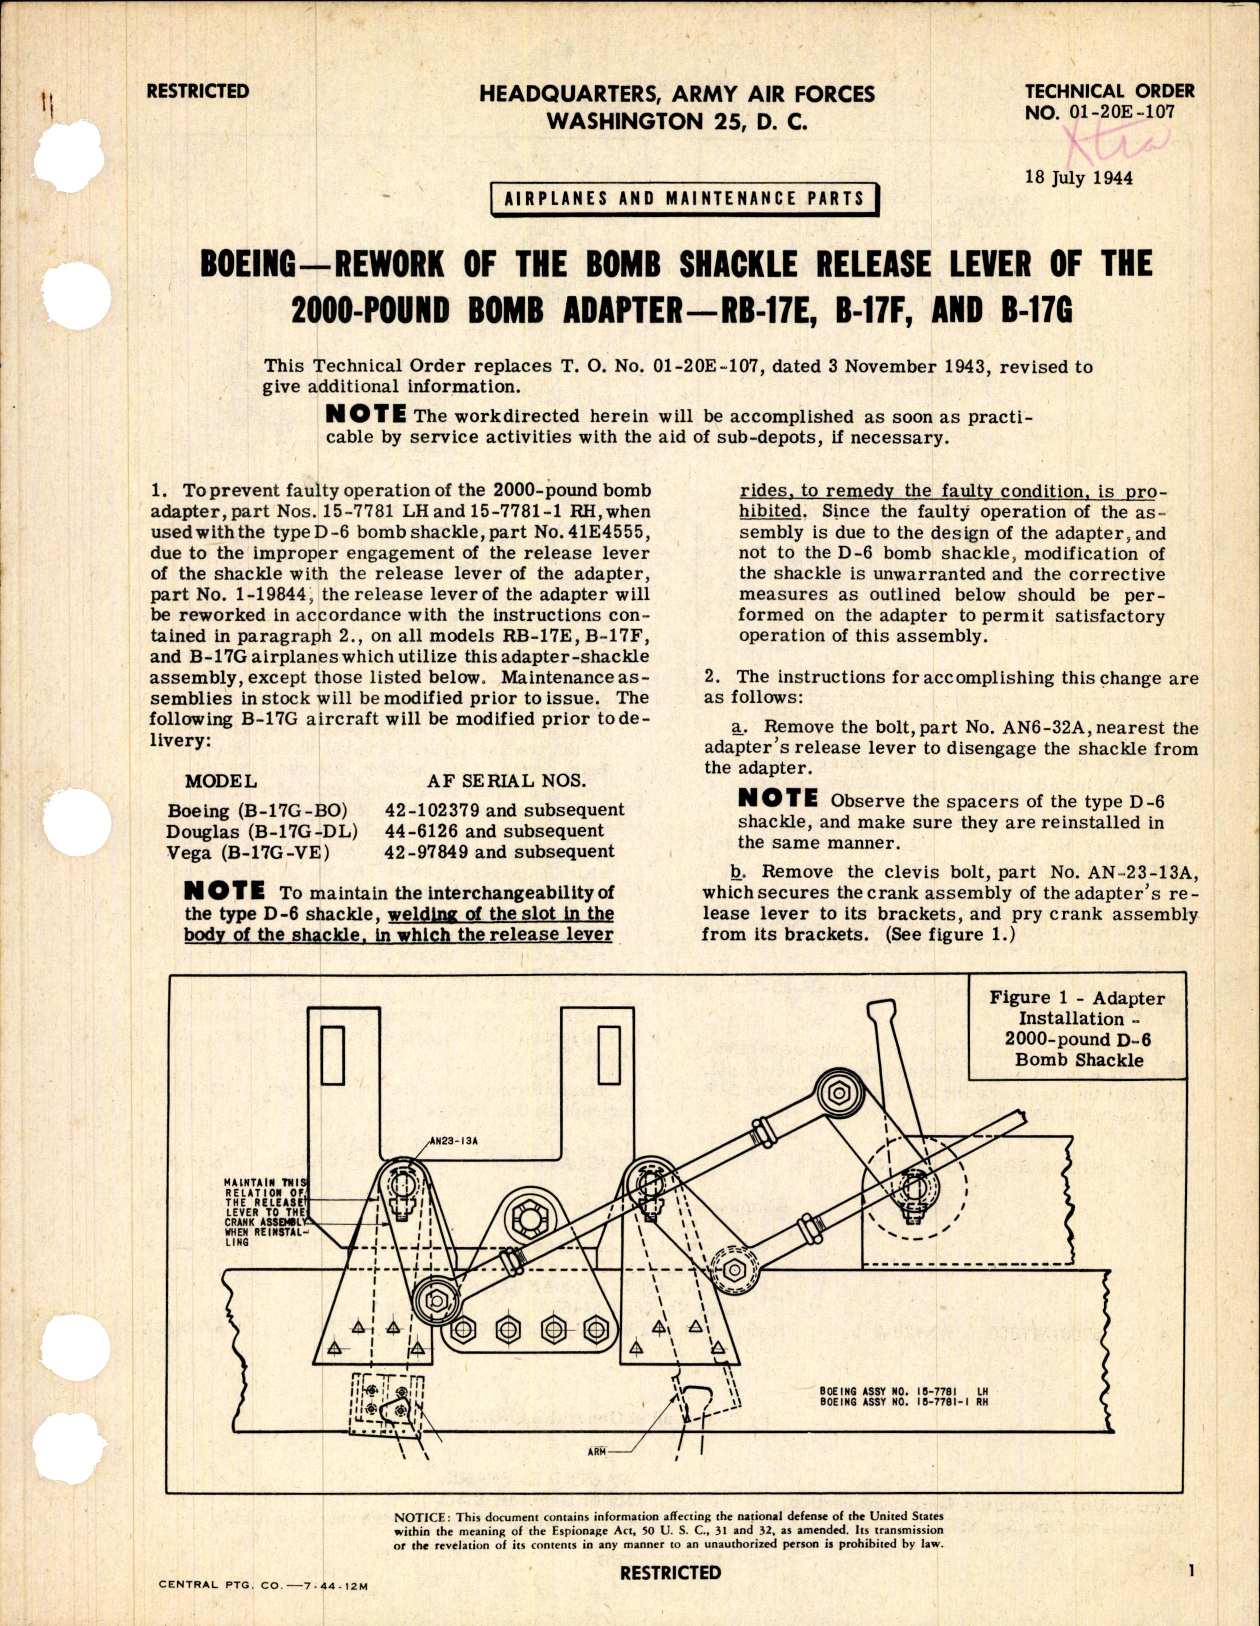 Sample page 1 from AirCorps Library document: Rework of Bomb Shackle Release Lever of the 2000lb Bomb Adapter for RB-17E, B-17F, and B-17G